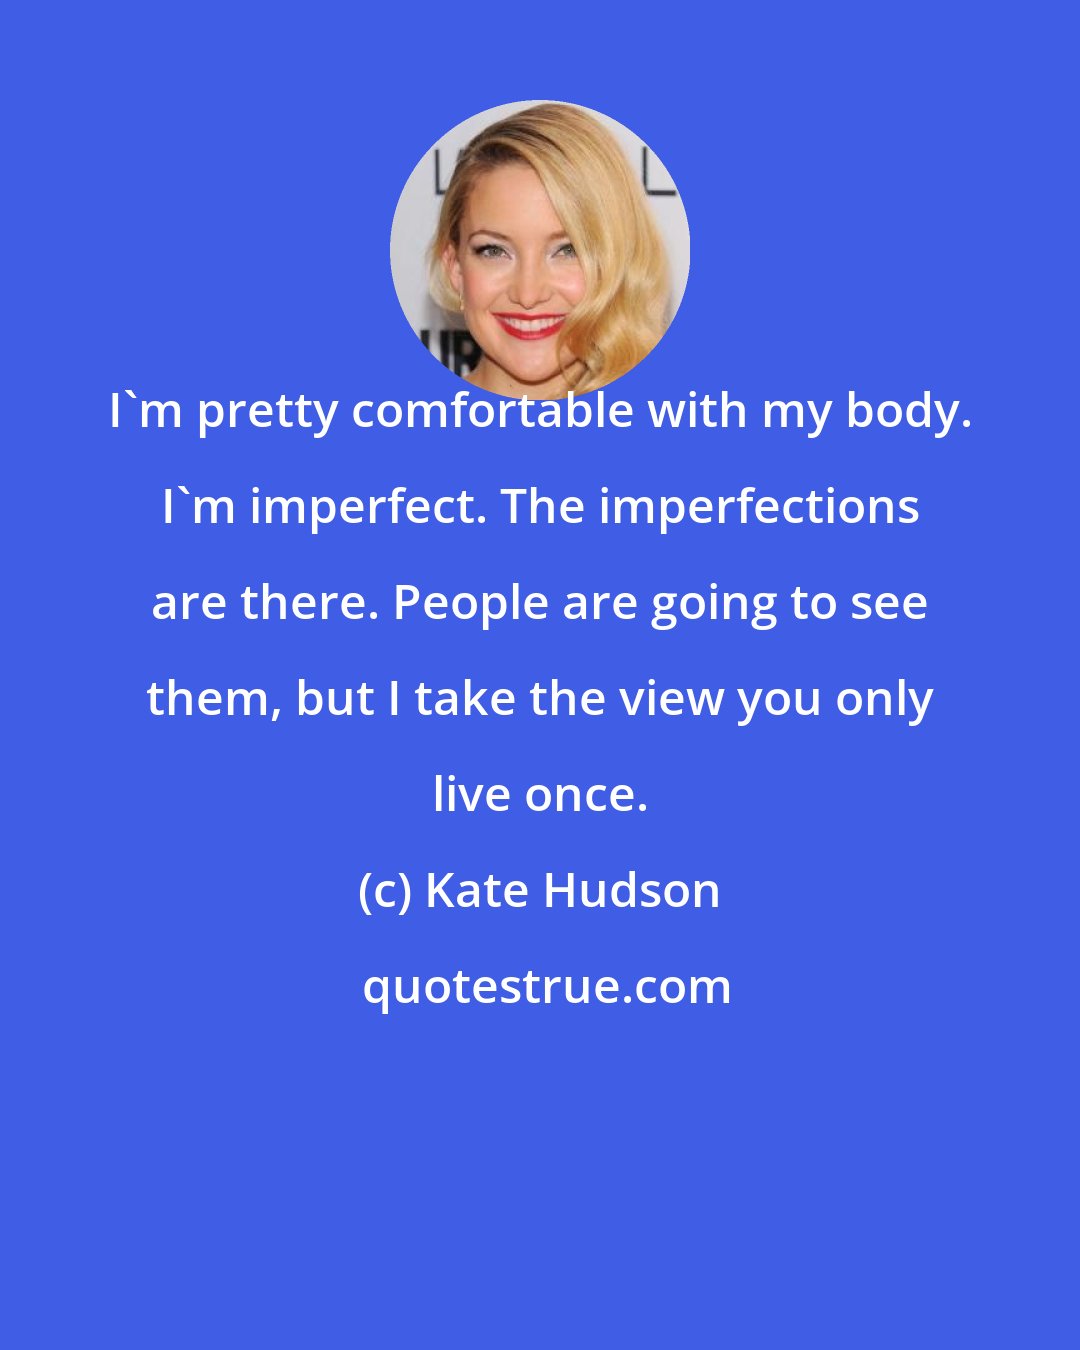 Kate Hudson: I'm pretty comfortable with my body. I'm imperfect. The imperfections are there. People are going to see them, but I take the view you only live once.